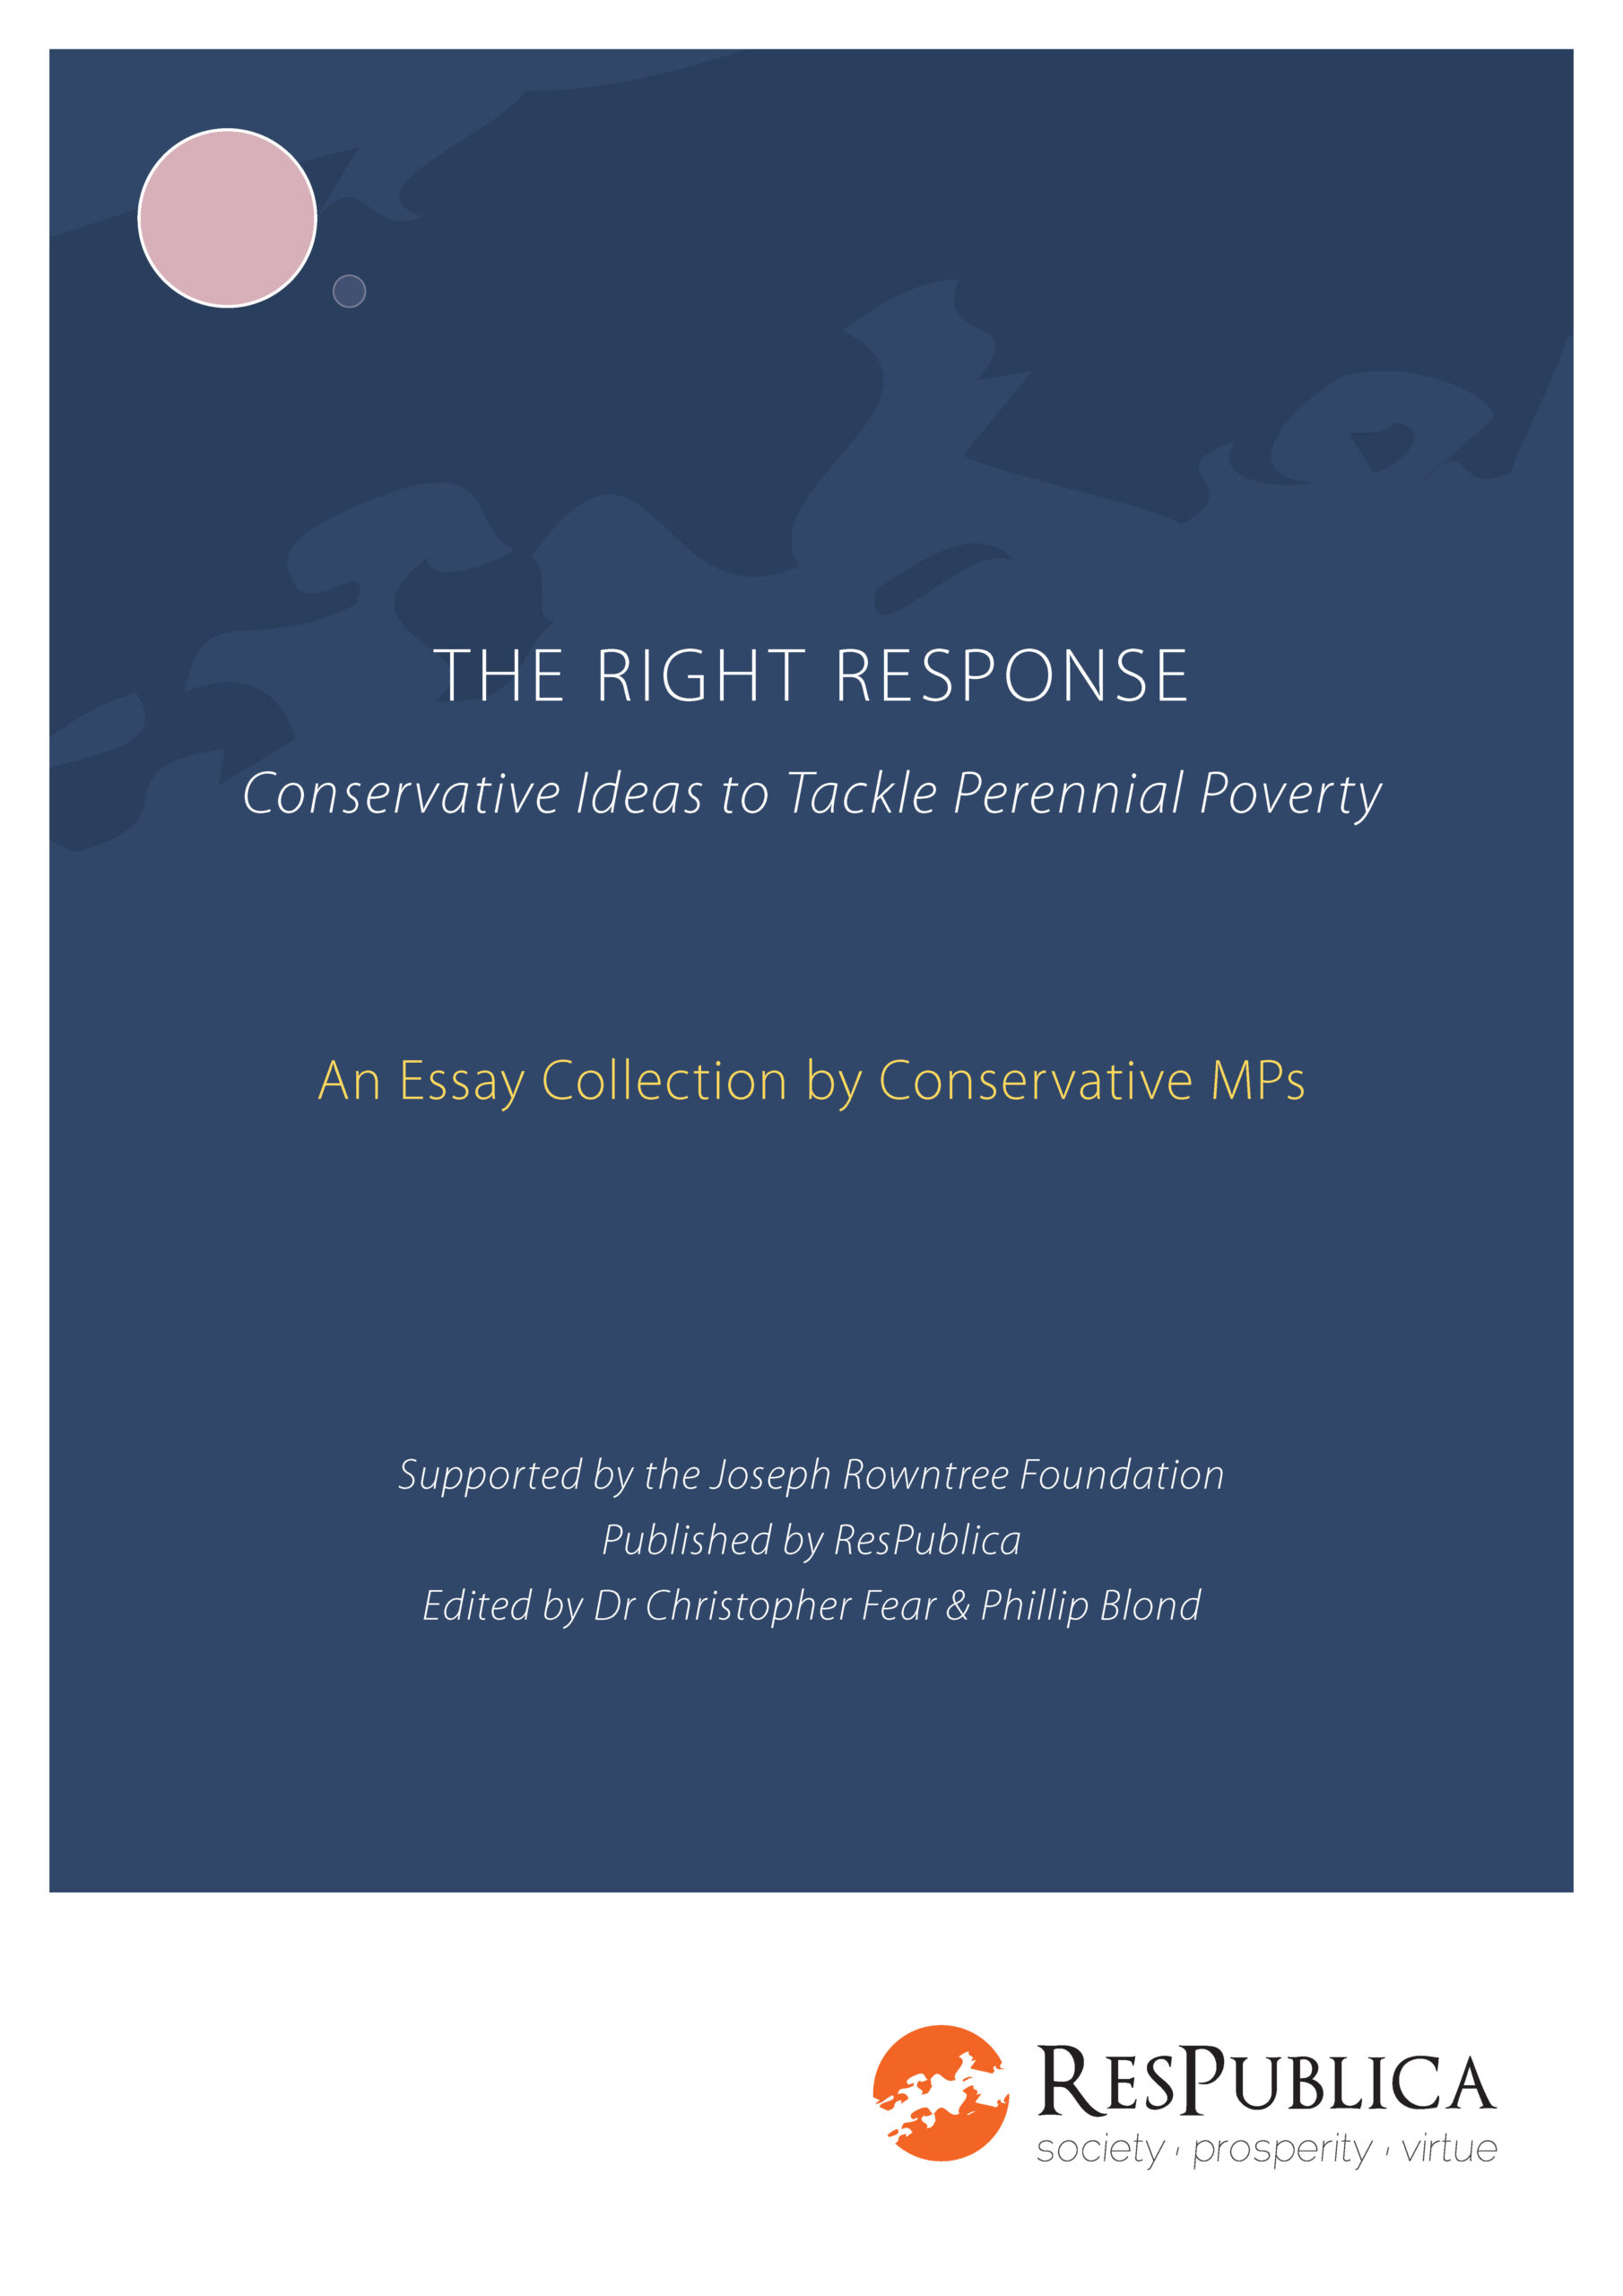 The Right Response: Conservative ideas to tackle perennial poverty